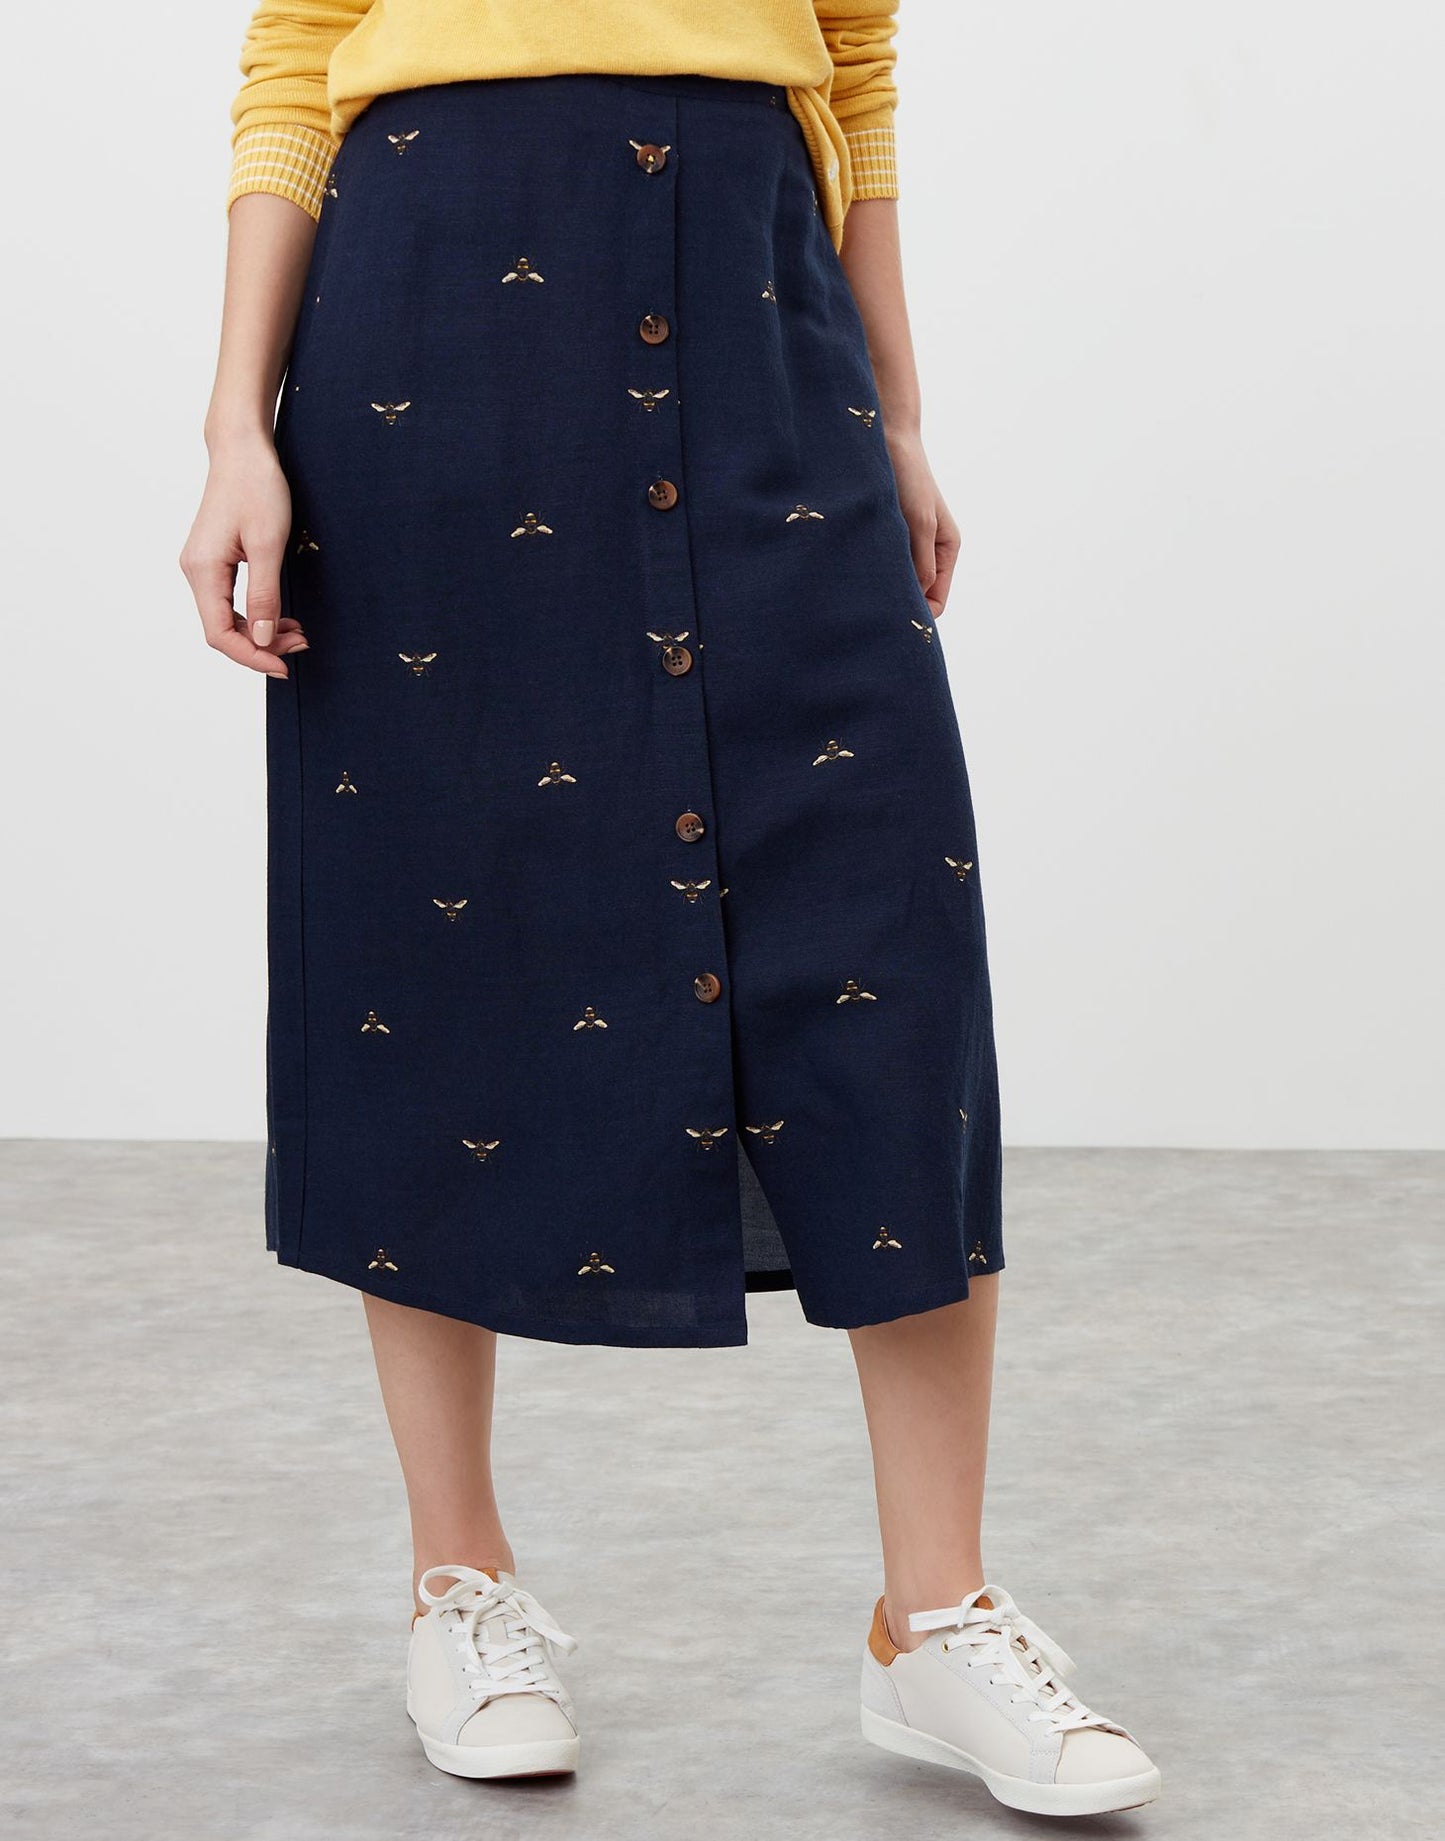 Joules Jeanette Button Through Skirt